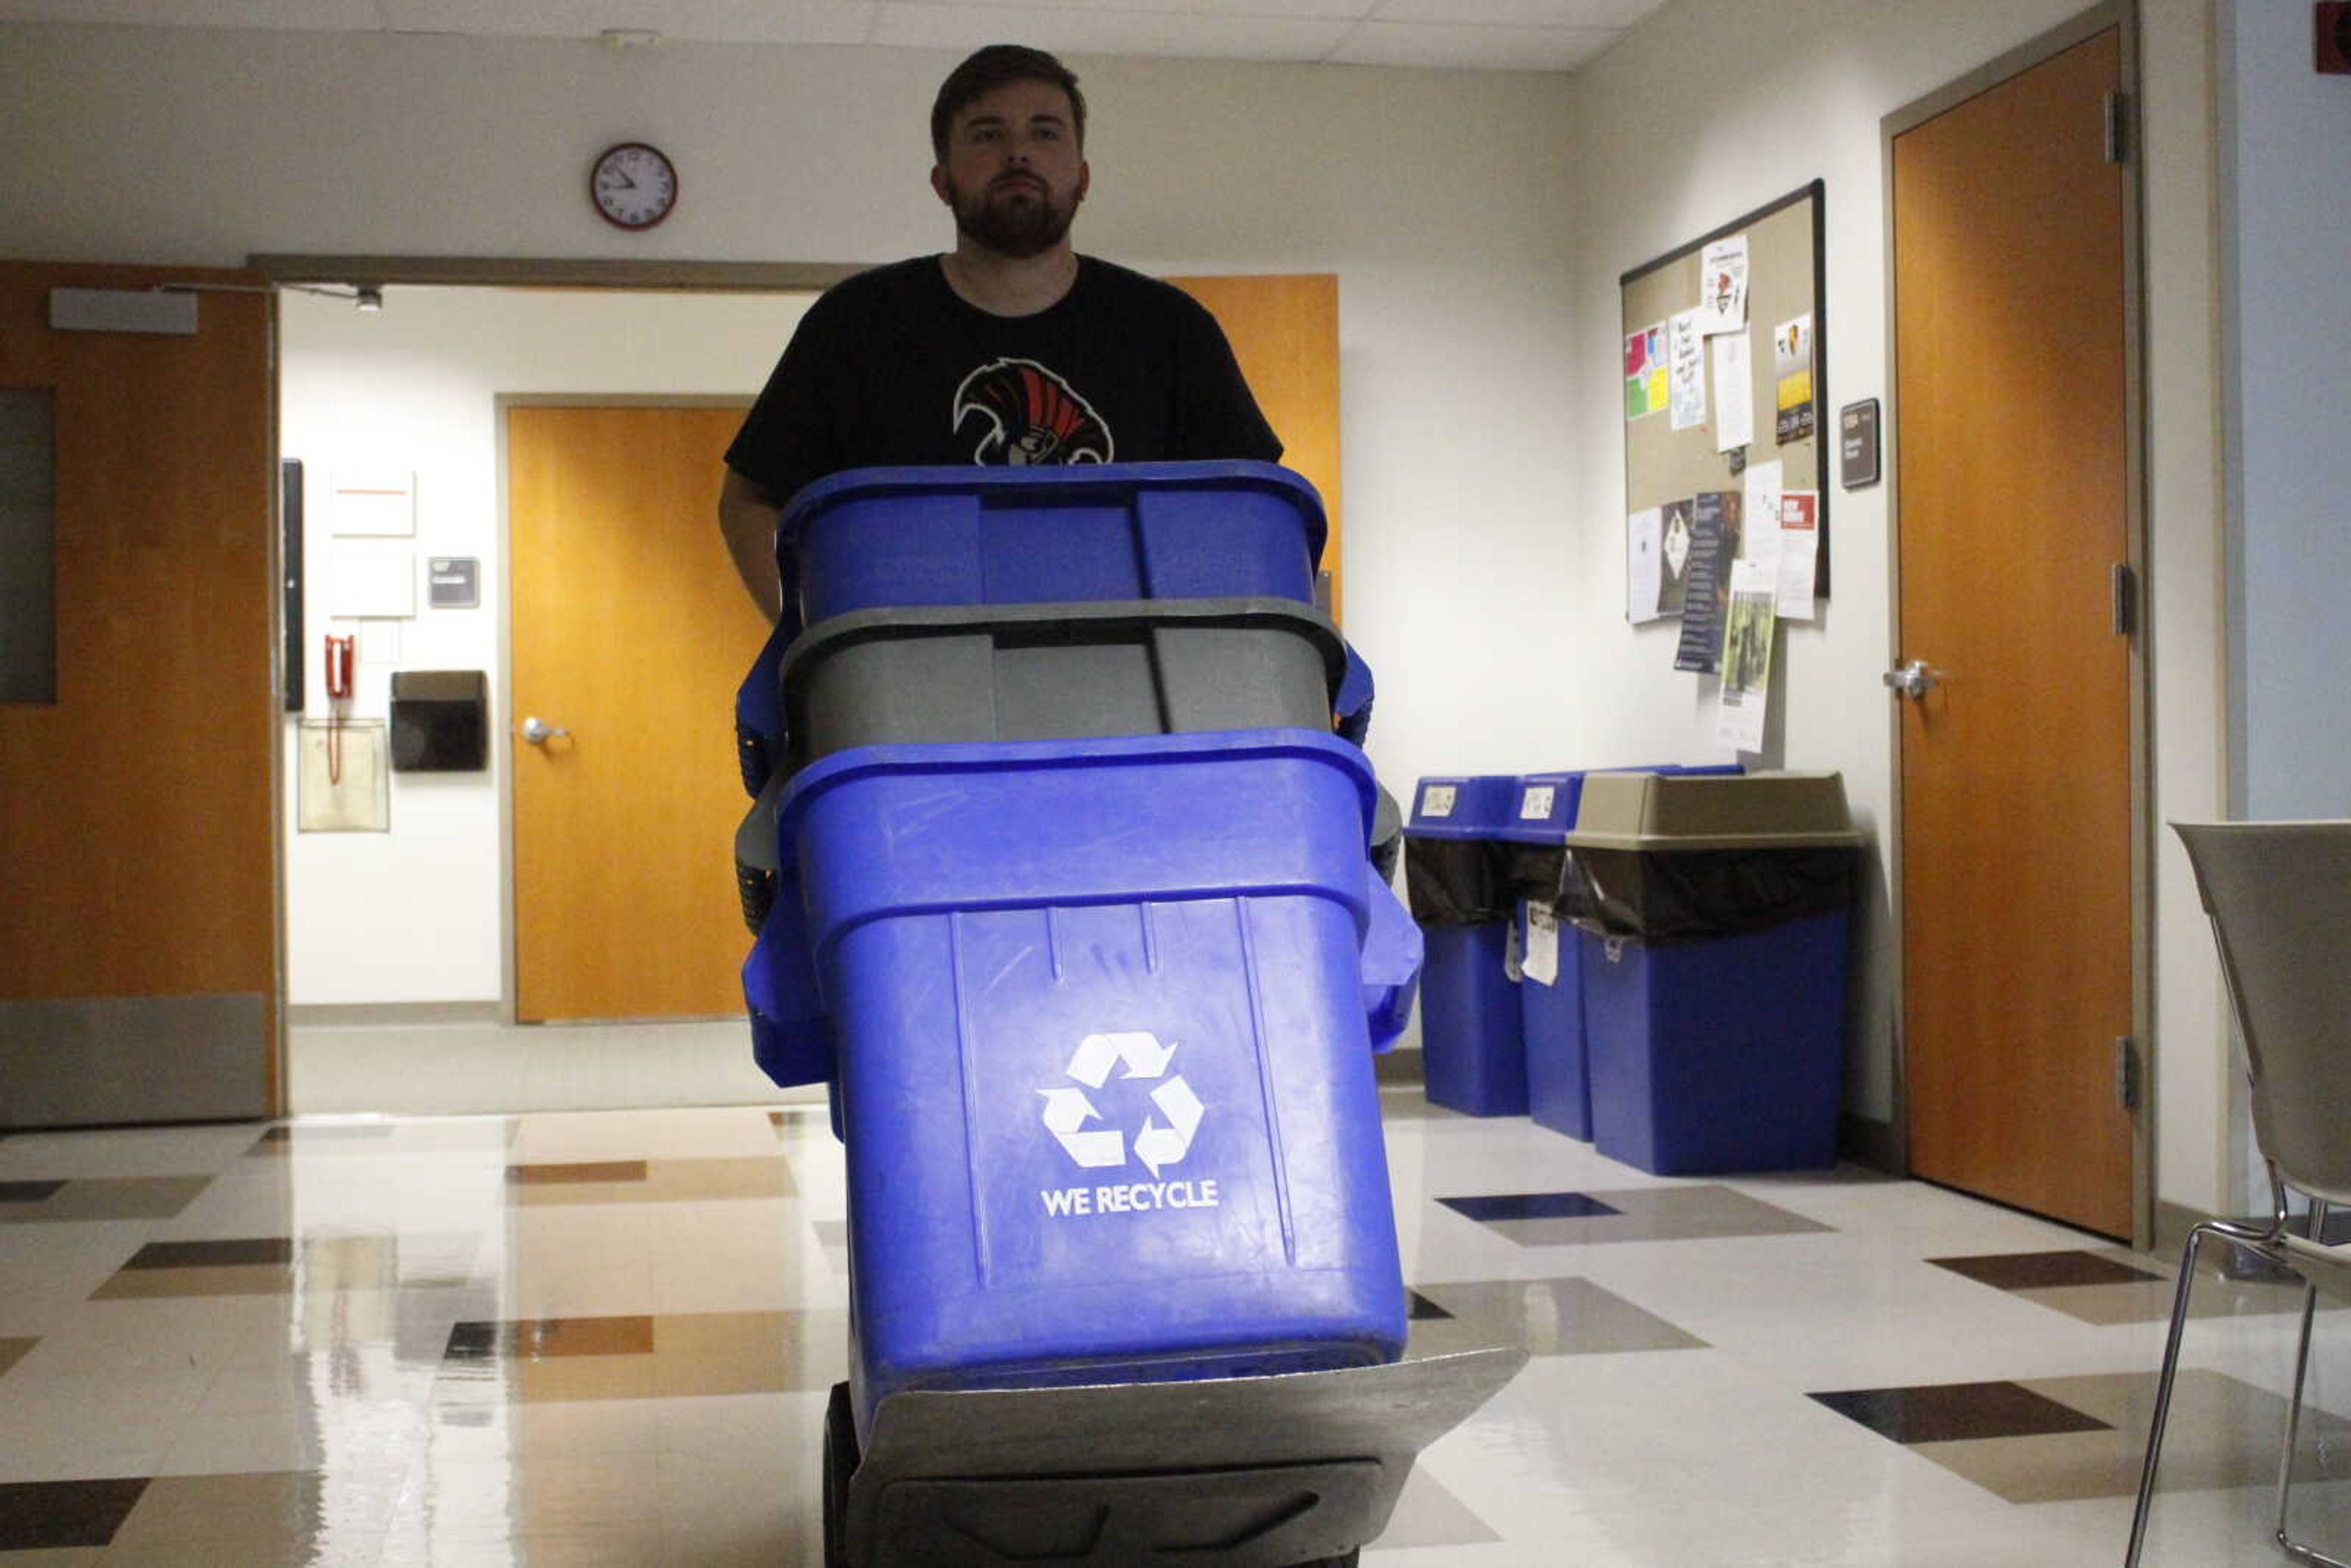 Southeast senior James Grosch replaces recycling bins at Carnahan Hall Aug. 27.